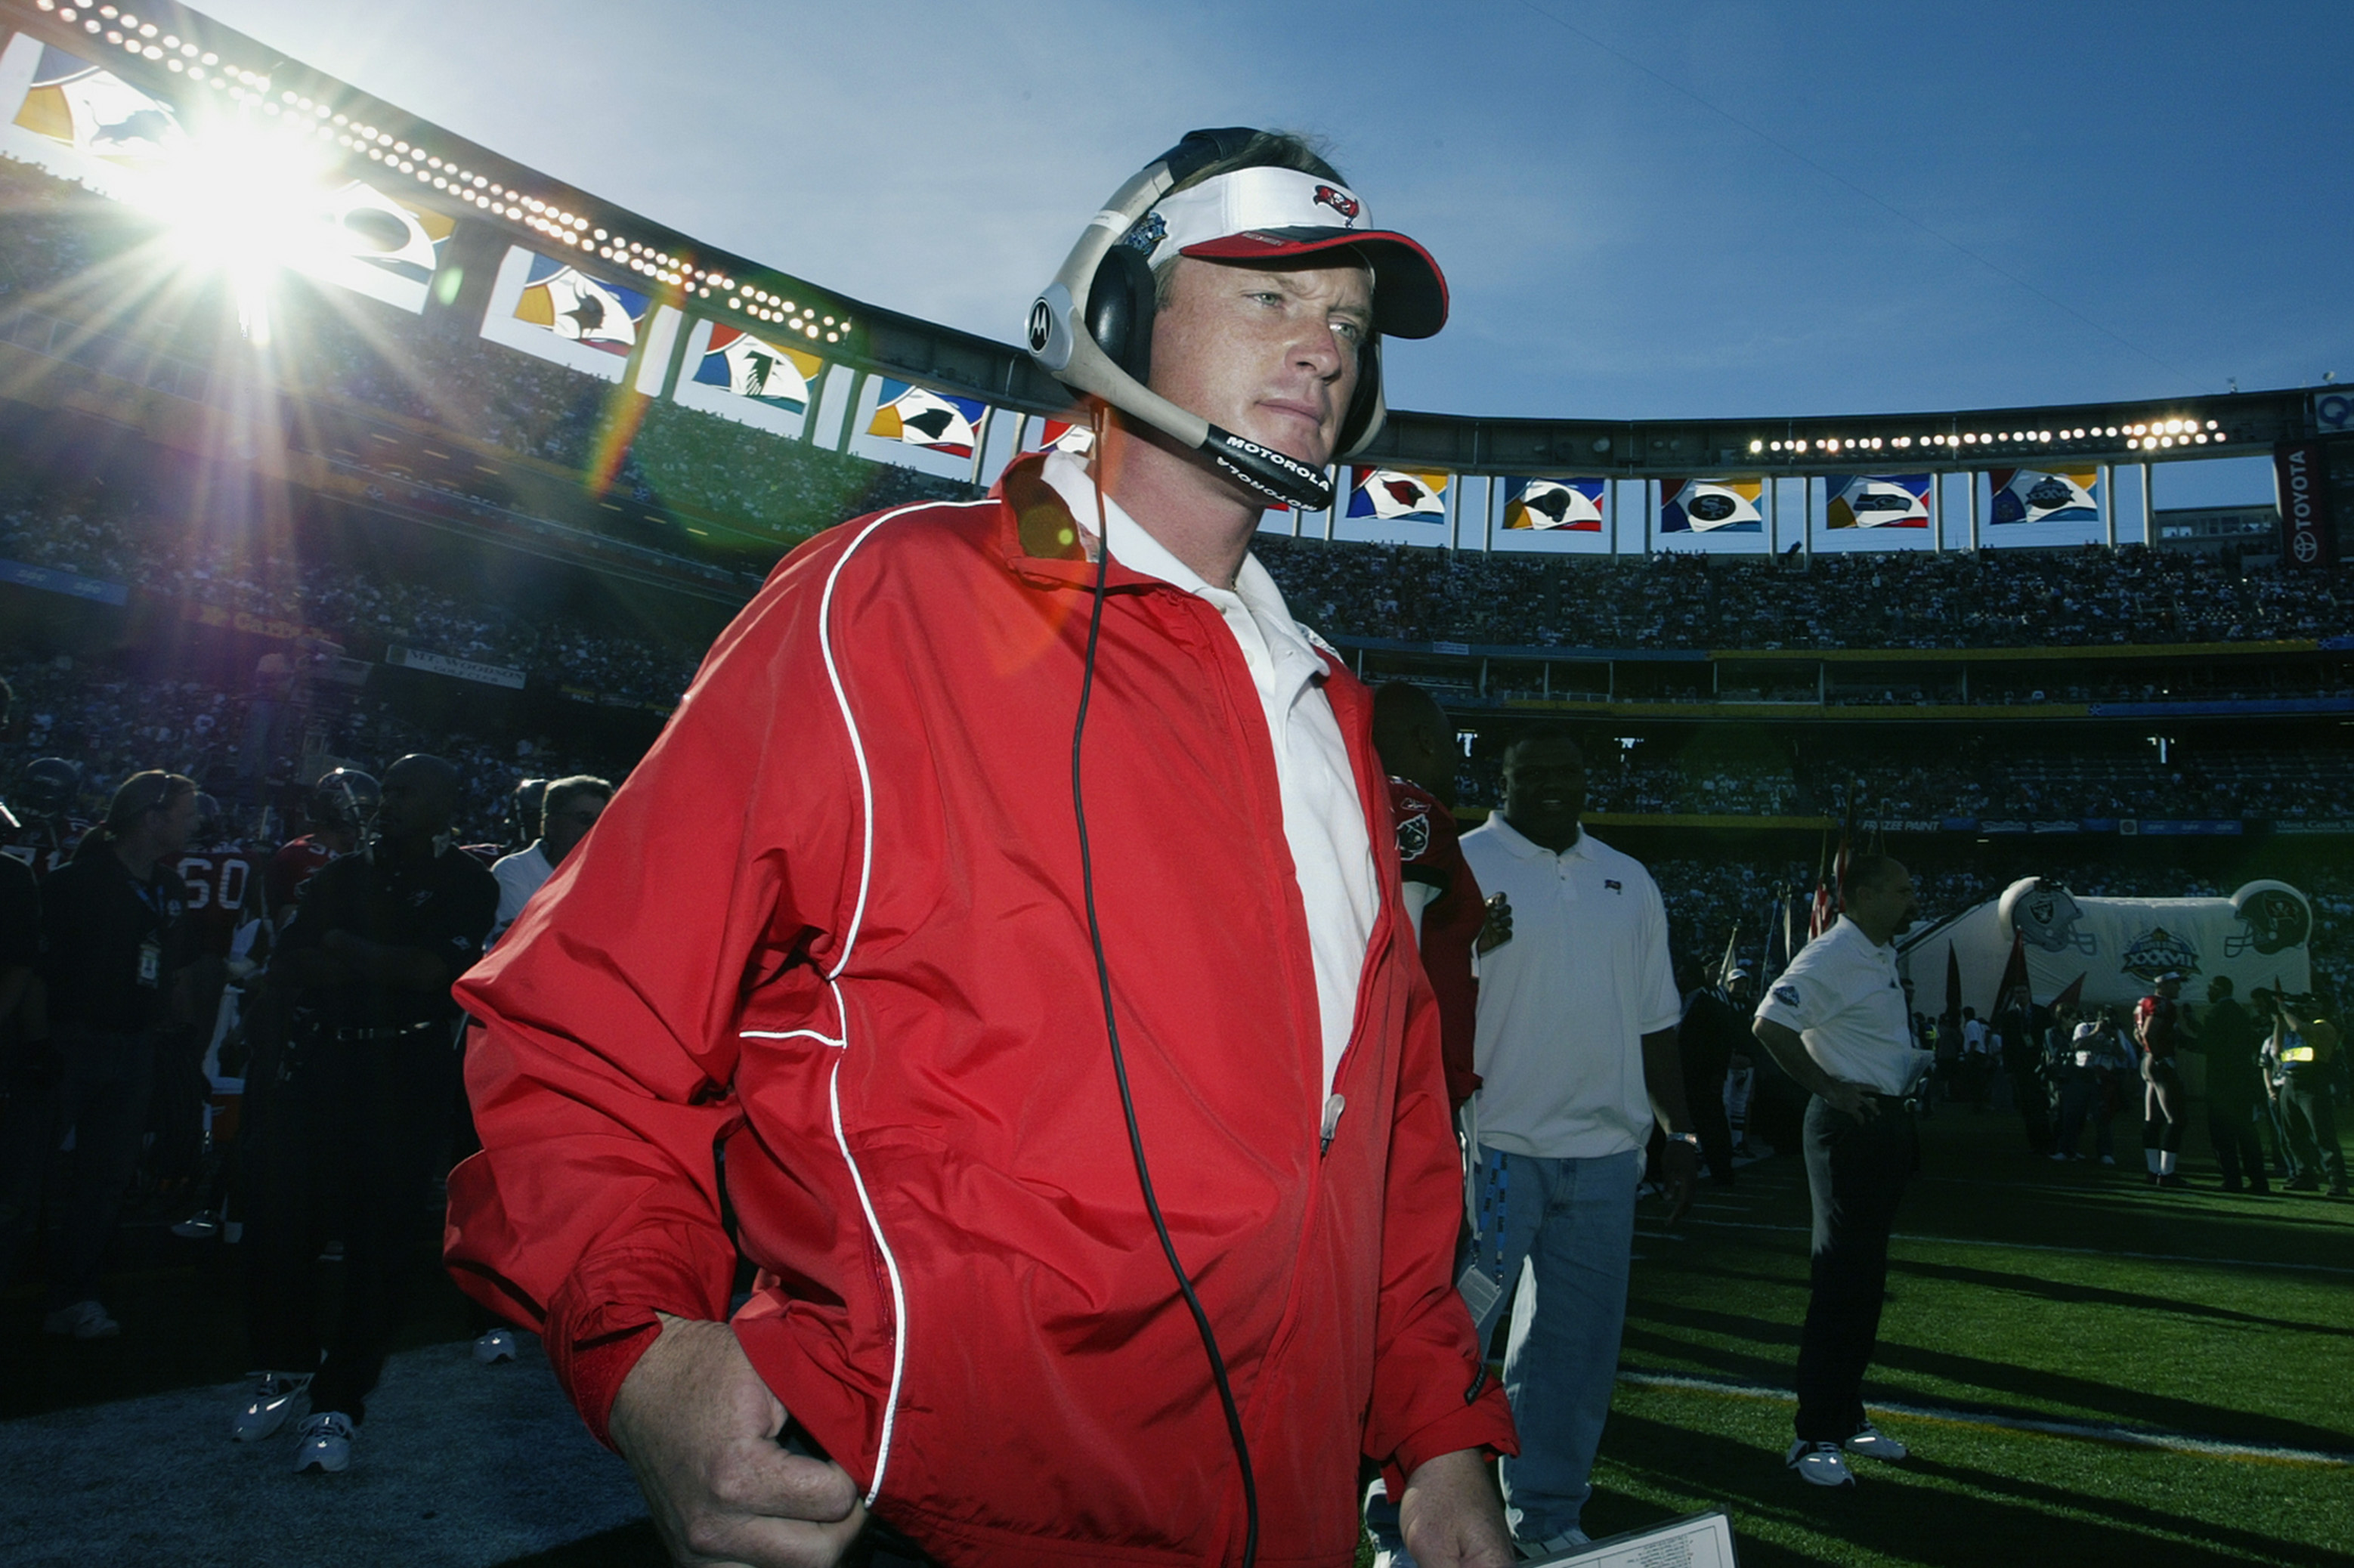 SAN DIEGO - JANUARY 26:  Head coach Jon Gruden of the Tampa Bay Buccaneers walks onto the field before Super Bowl XXXVII against the Oakland Raiders at Qualcomm Stadium on January 26, 2003 in San Diego, California.  The Buccaneers defeated the Raiders 48-